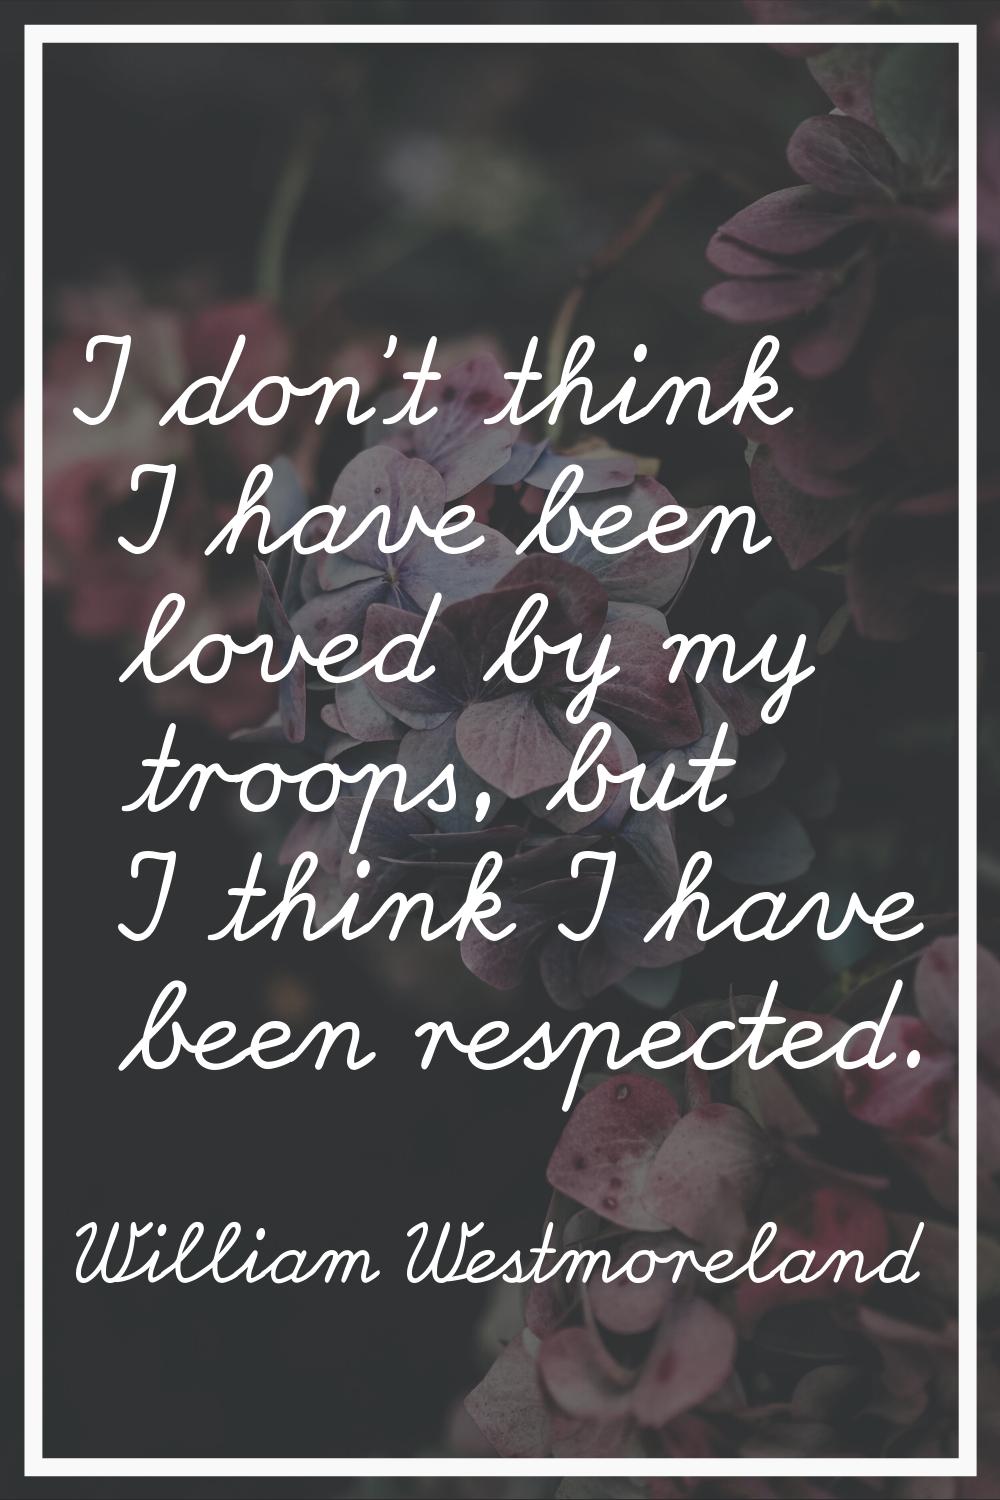 I don't think I have been loved by my troops, but I think I have been respected.